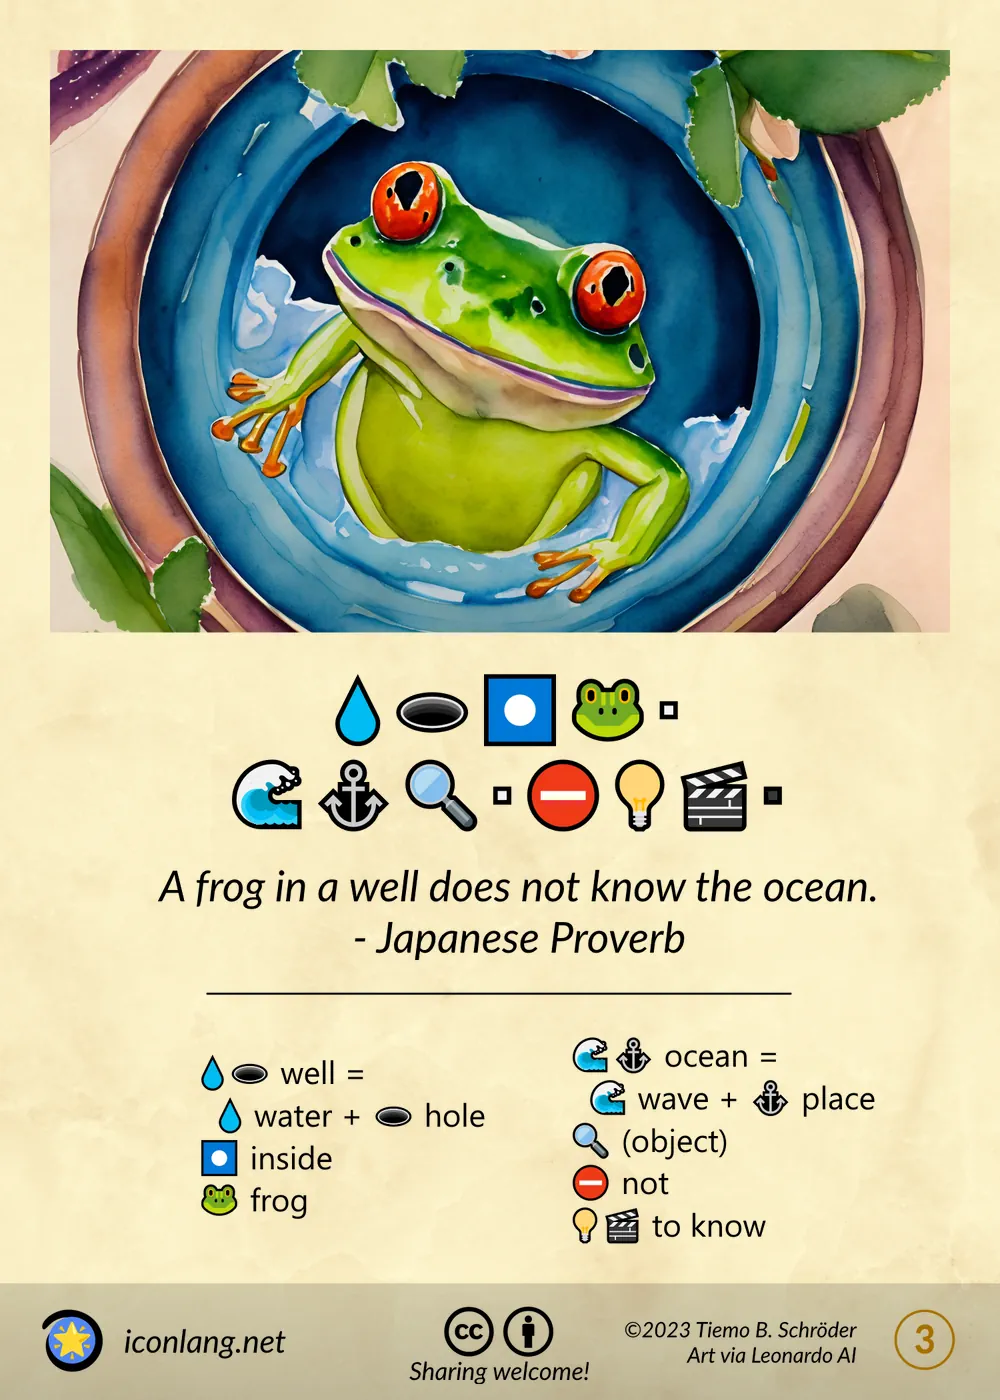 Card: A frog in a well does not know the ocean. - Japanese Proverb